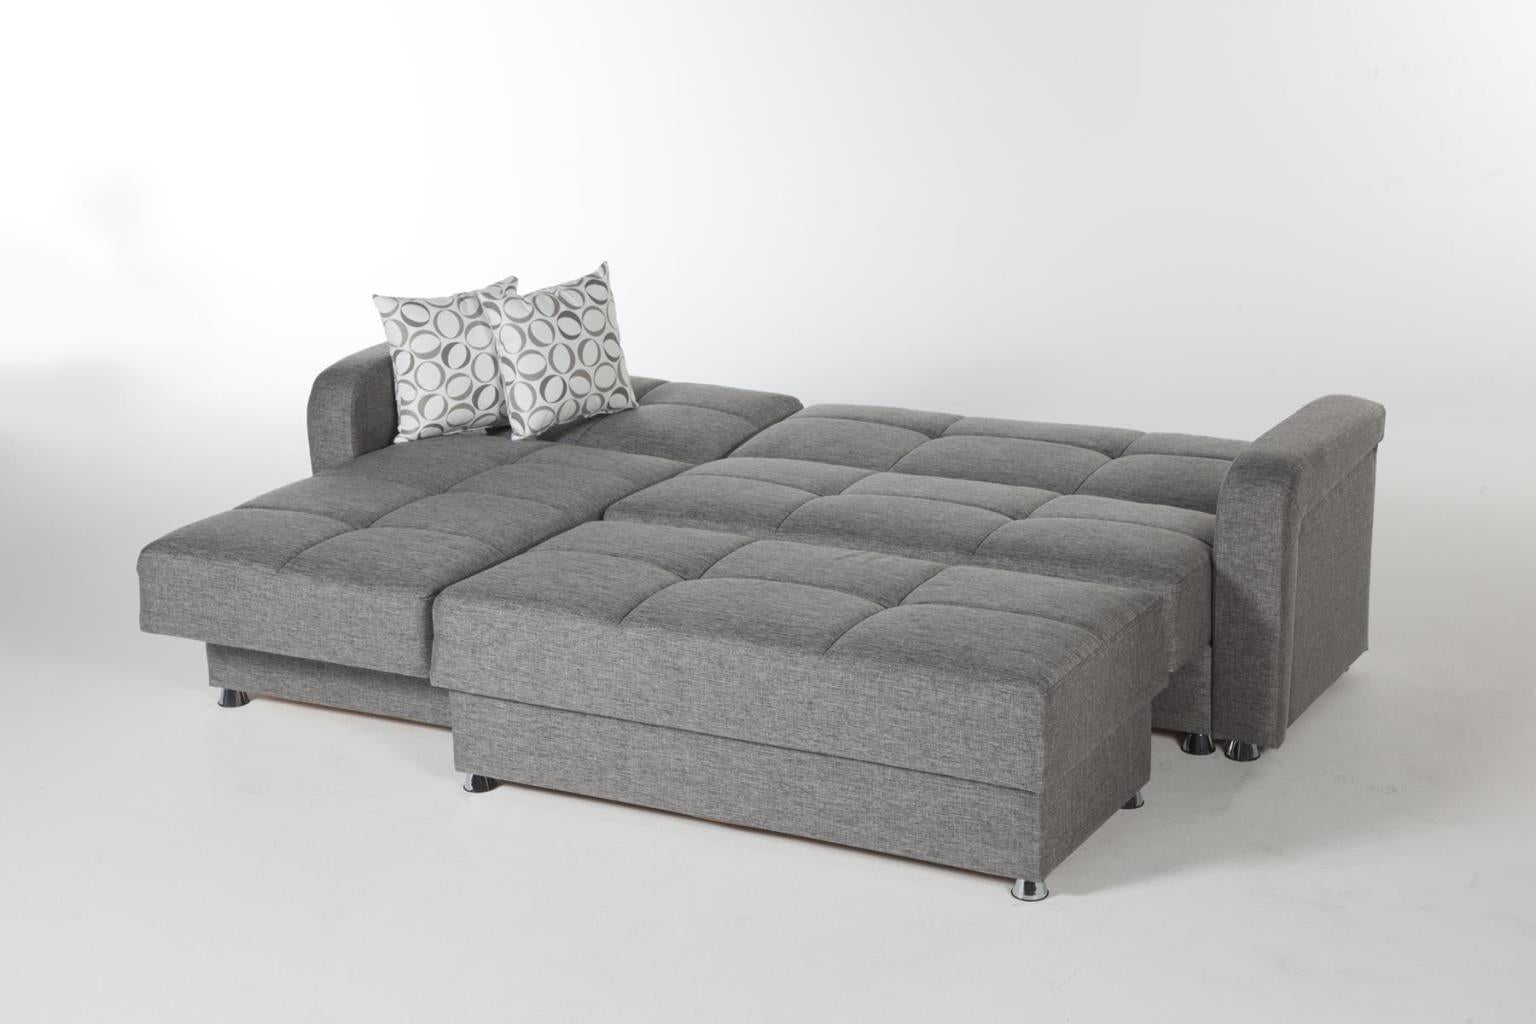 Vision Set (Sectional Sofa & Ottoman) - Home Store Furniture